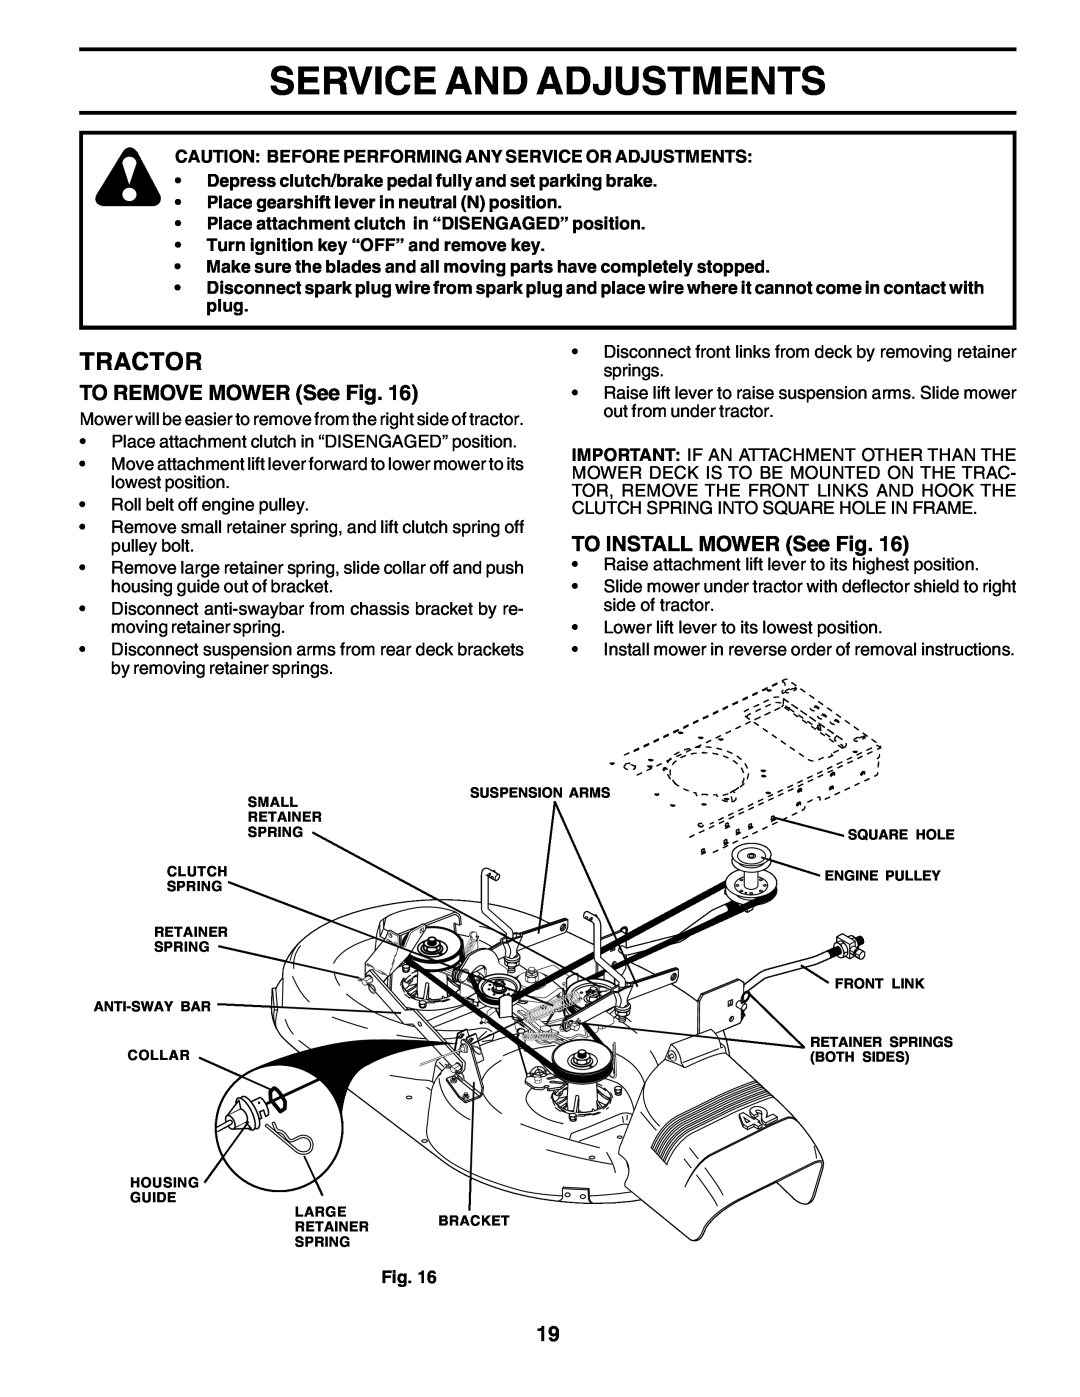 Poulan PC14542D owner manual Service And Adjustments, Tractor, TO REMOVE MOWER See Fig, TO INSTALL MOWER See Fig 